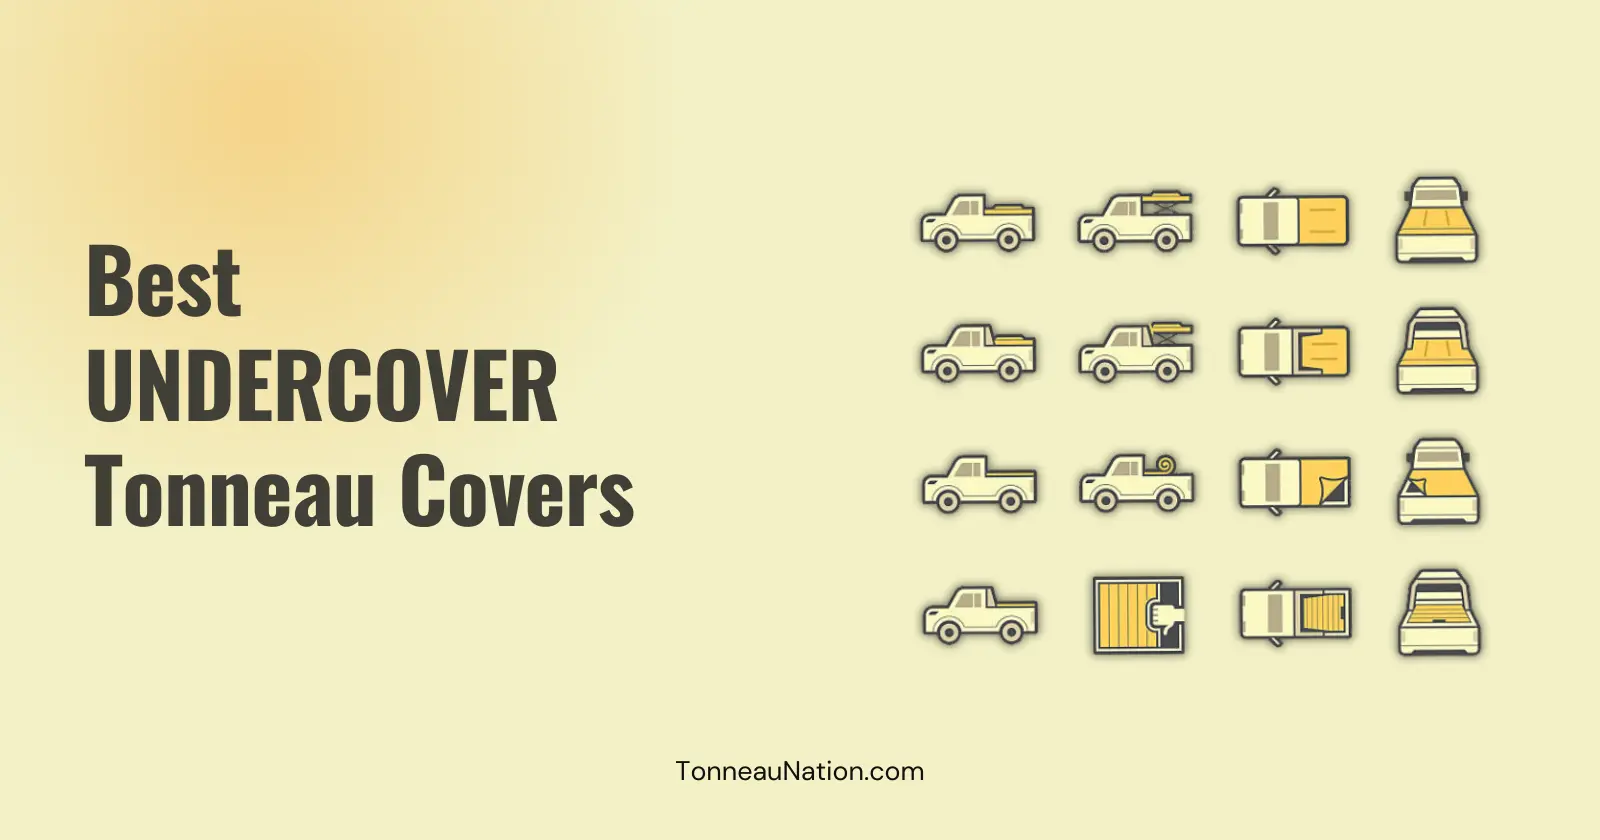 Tonneau cover from UNDERCOVER brand